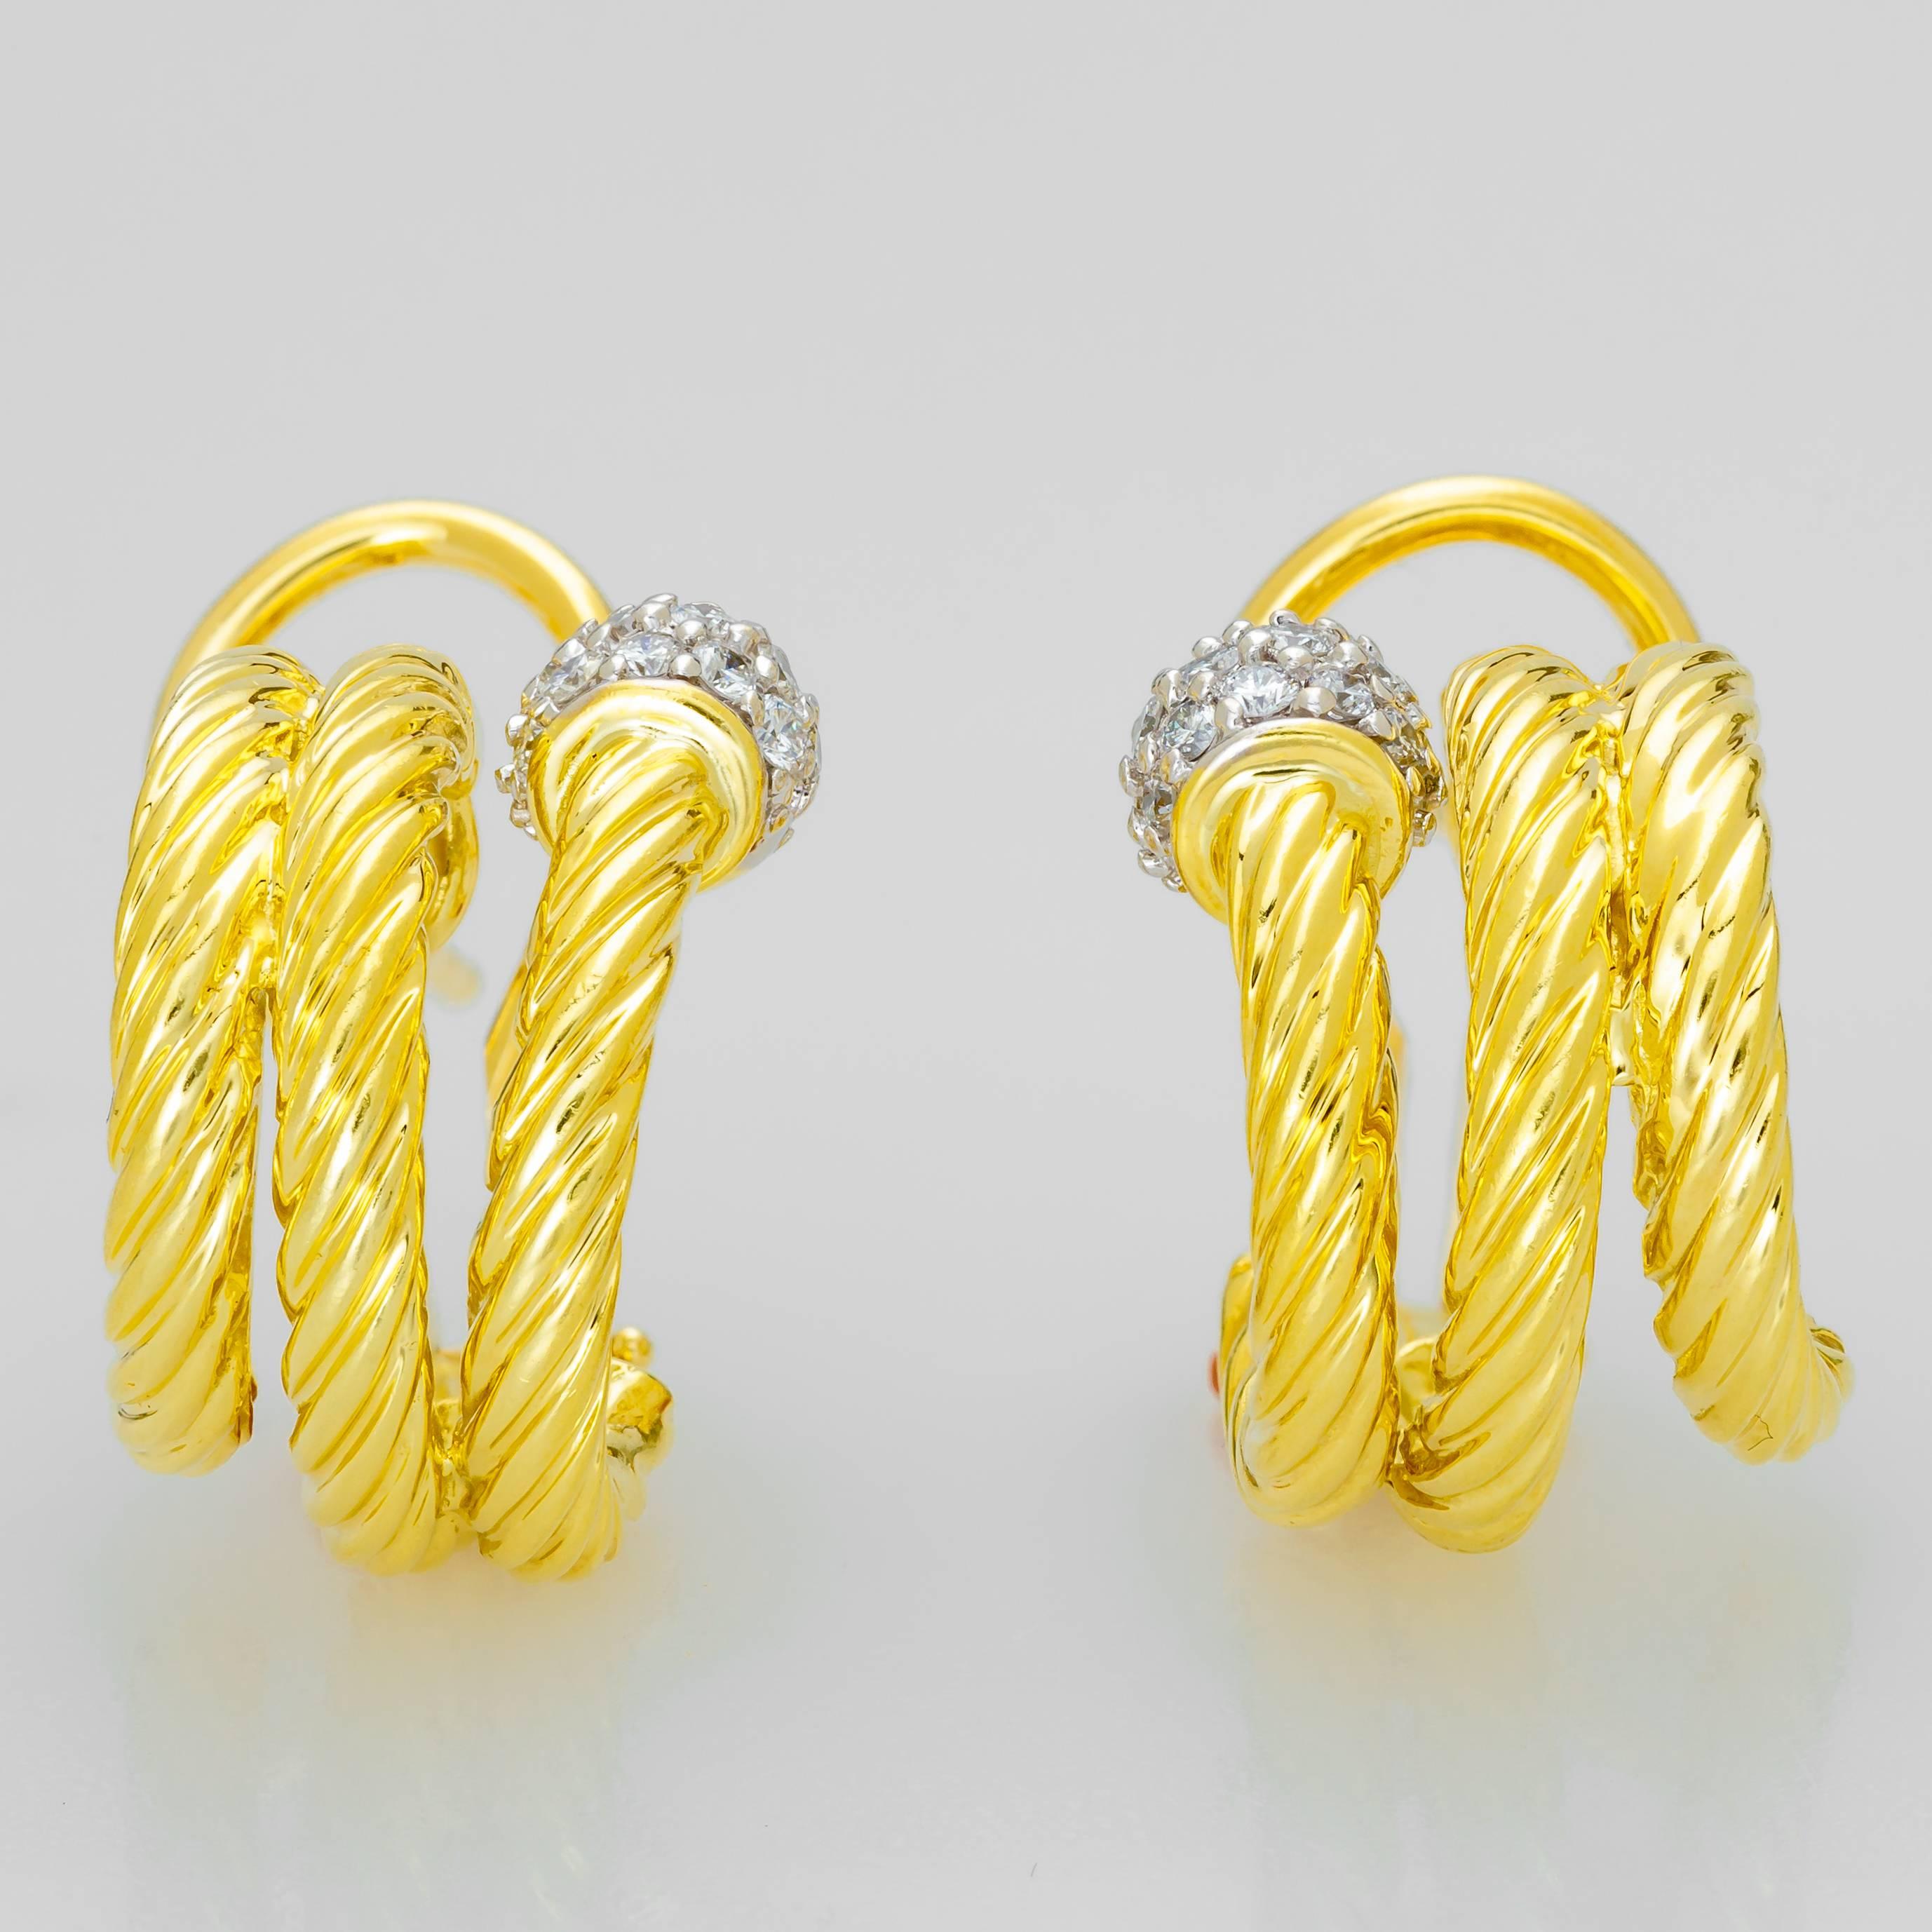 This set of David Yurman earrings feature a cable design in 18K yellow gold.  Each earring has a pave ball of 16 diamonds at the end of the curl.  They have an omega clasp on the back.  Each earring measures 17mm tall x 16mm deep x 11mm wide and